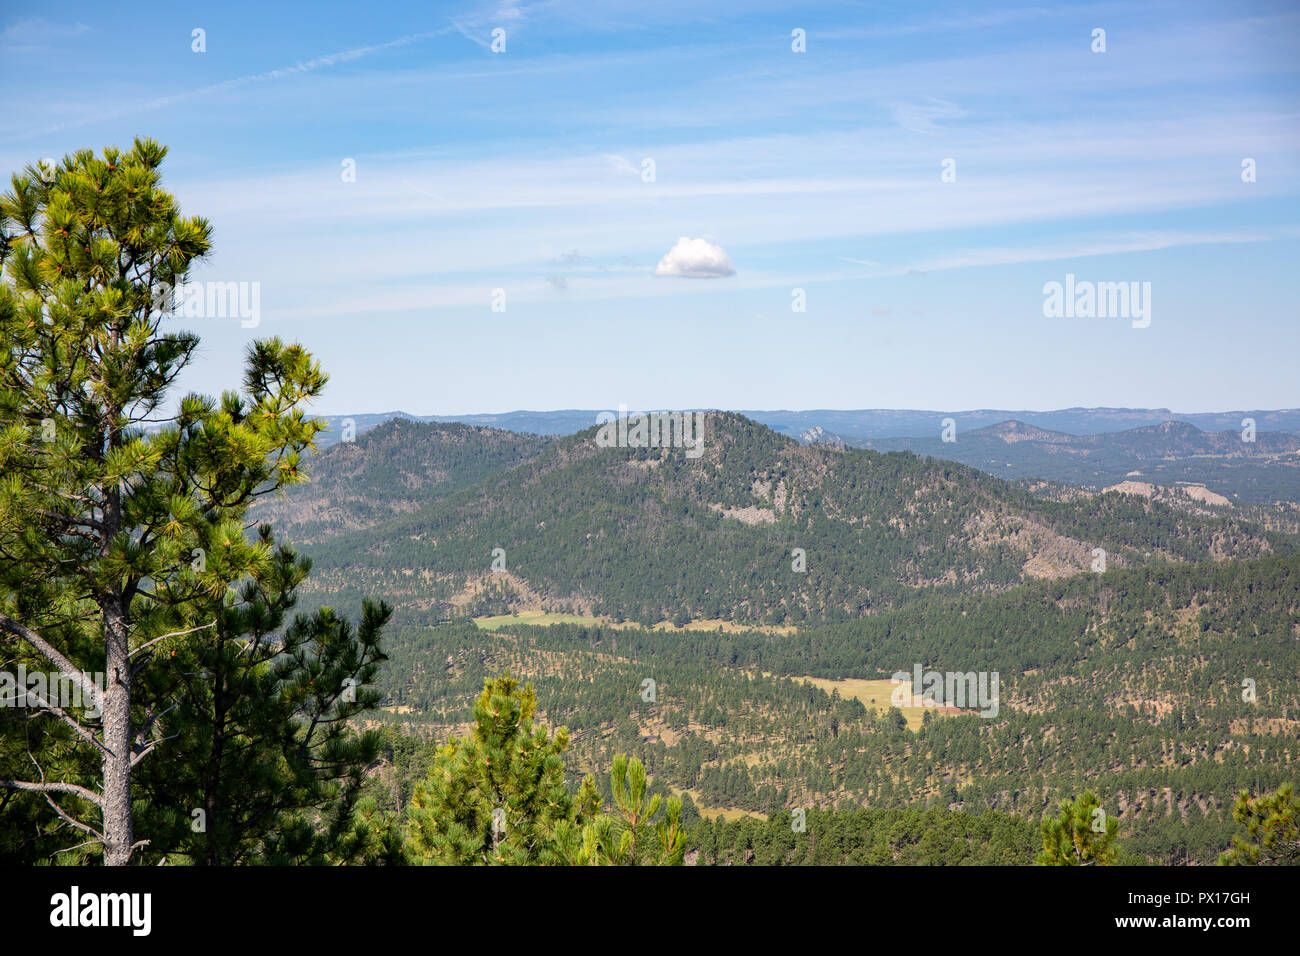 Landscape of beautiful Cloudy sky over Custer State Park. Stock Photo